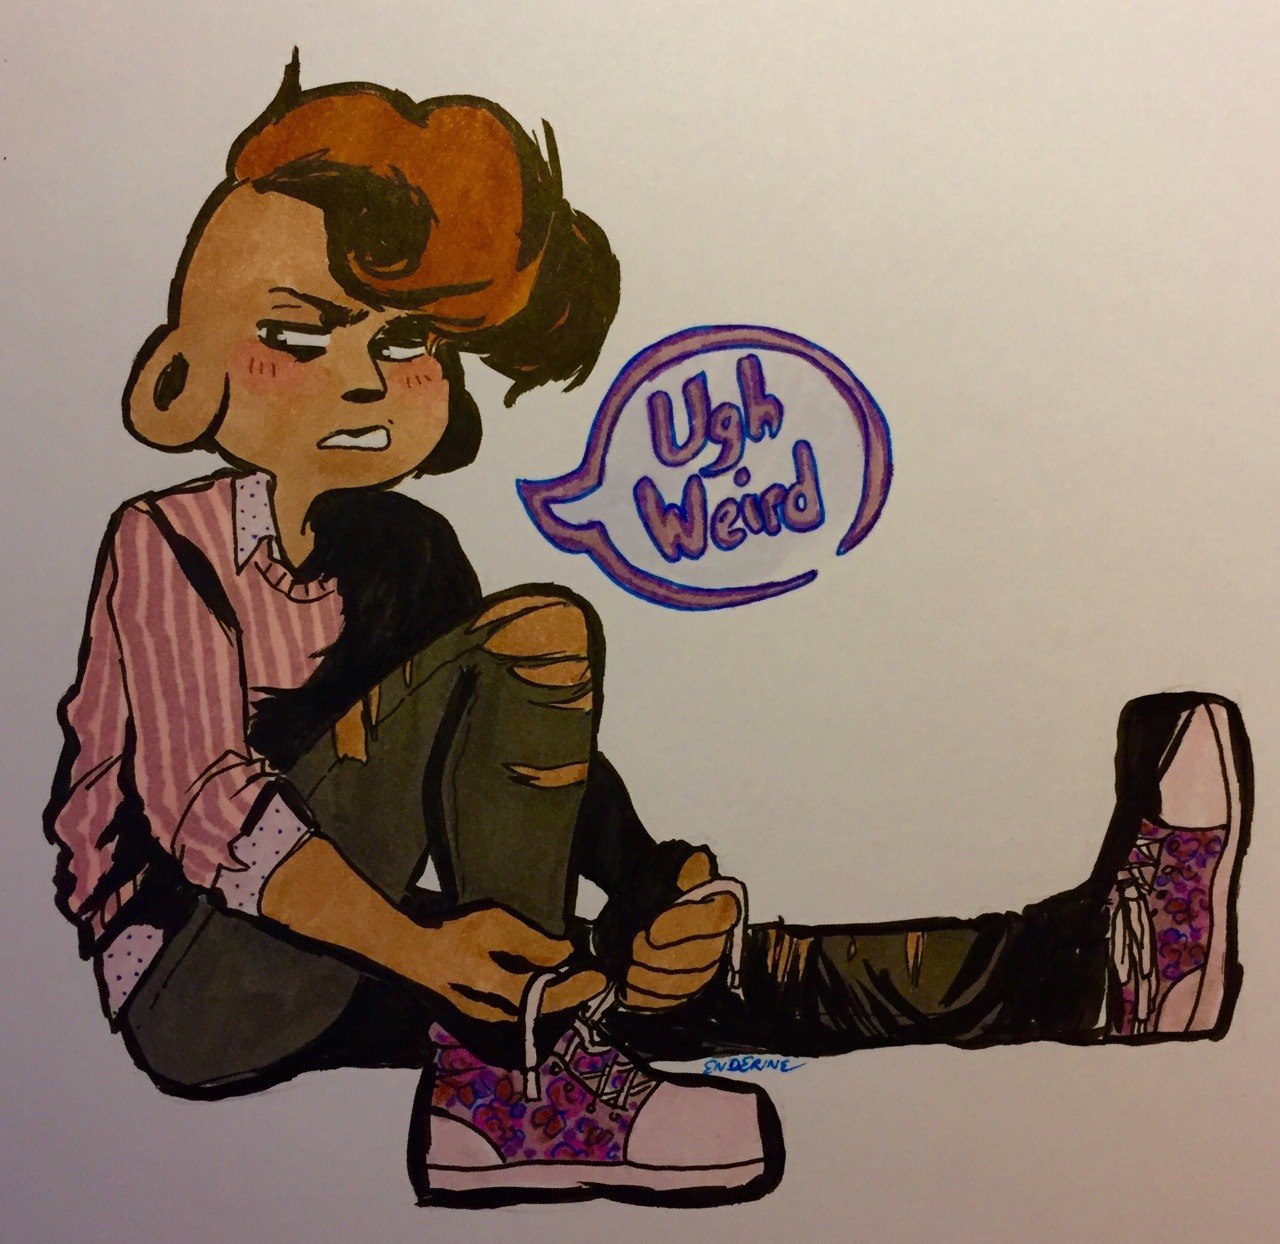 Of course I also had to try drawing Lars with my new brush pen too